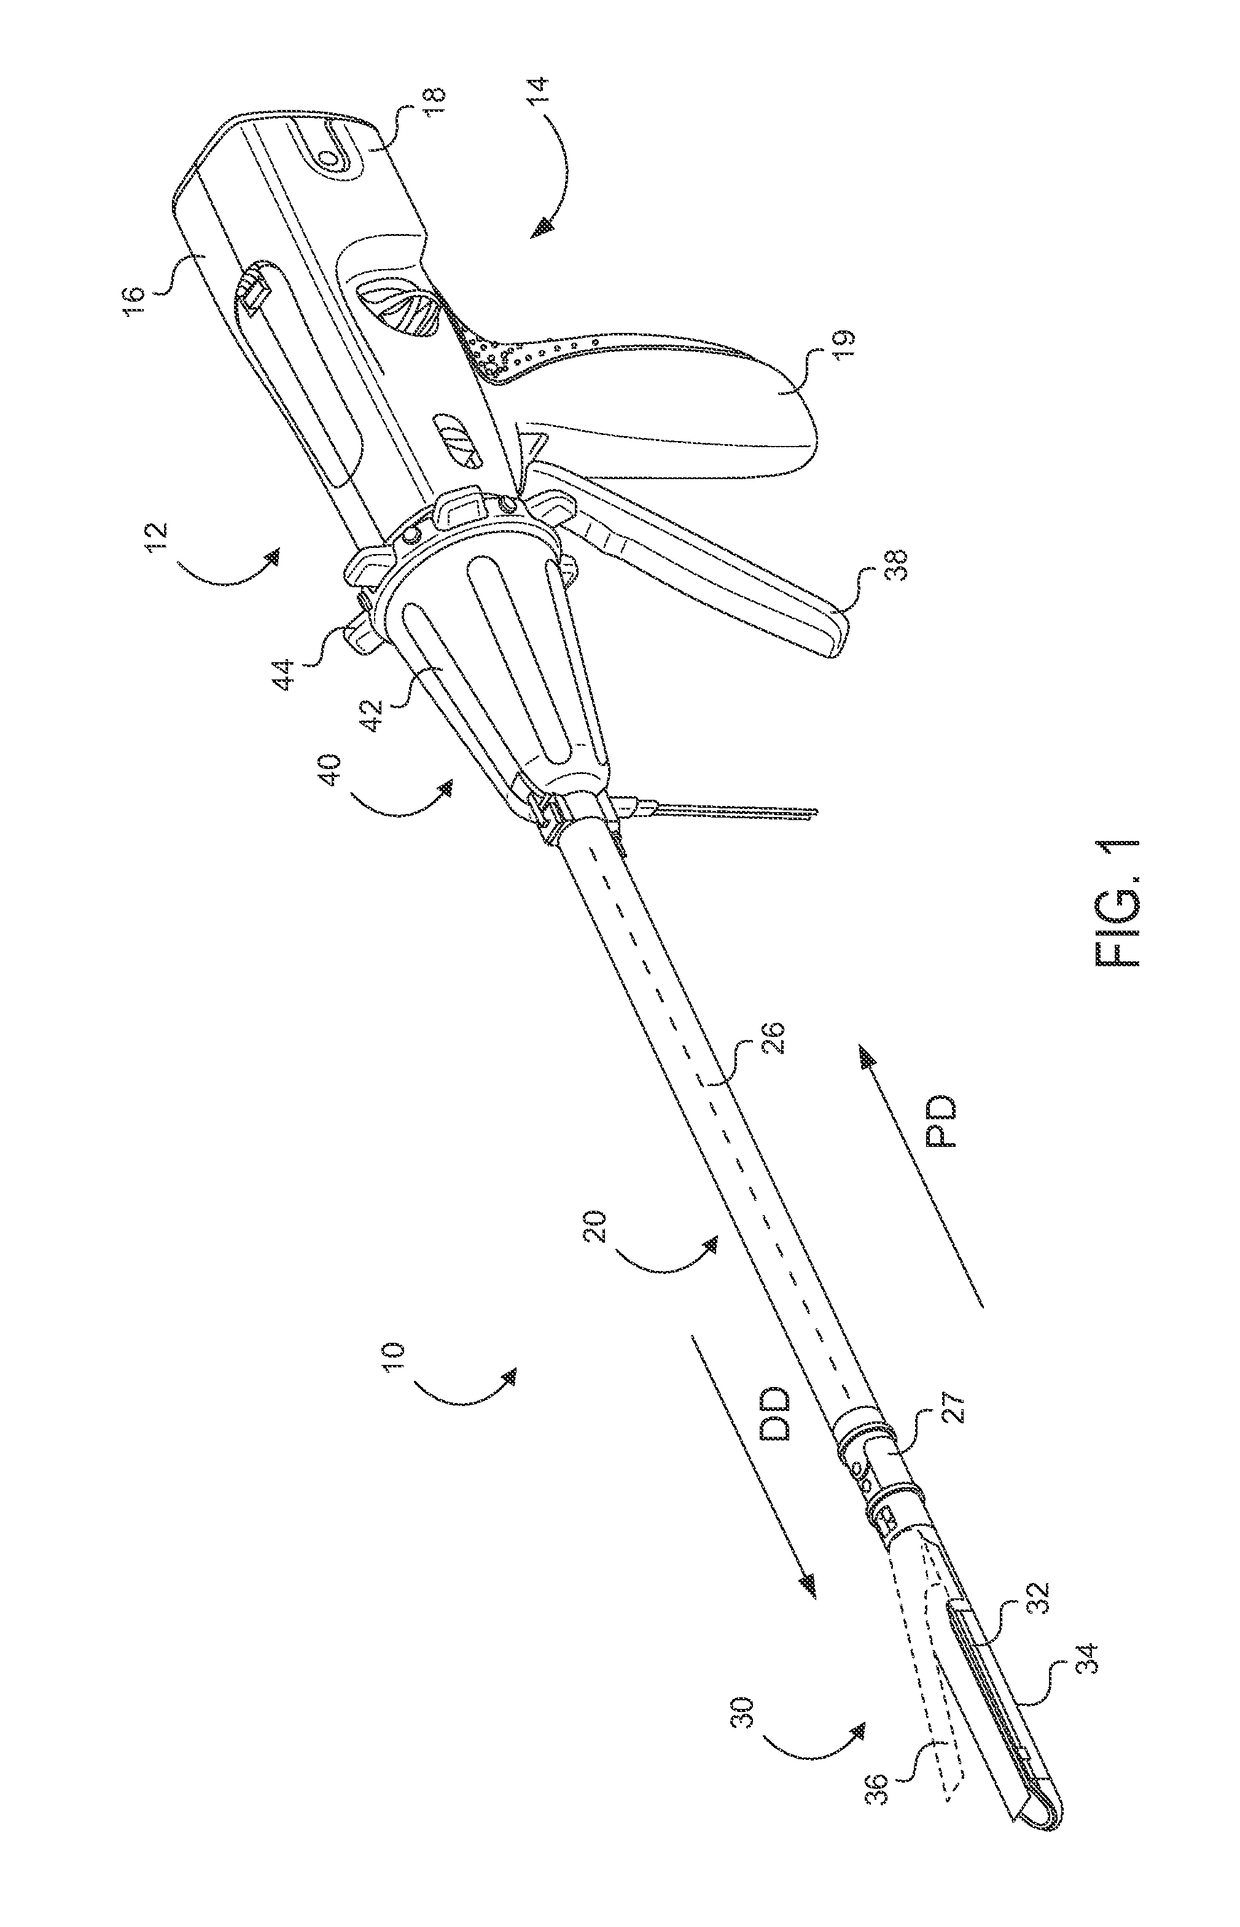 Control and electrical connections for electrode endocutter device